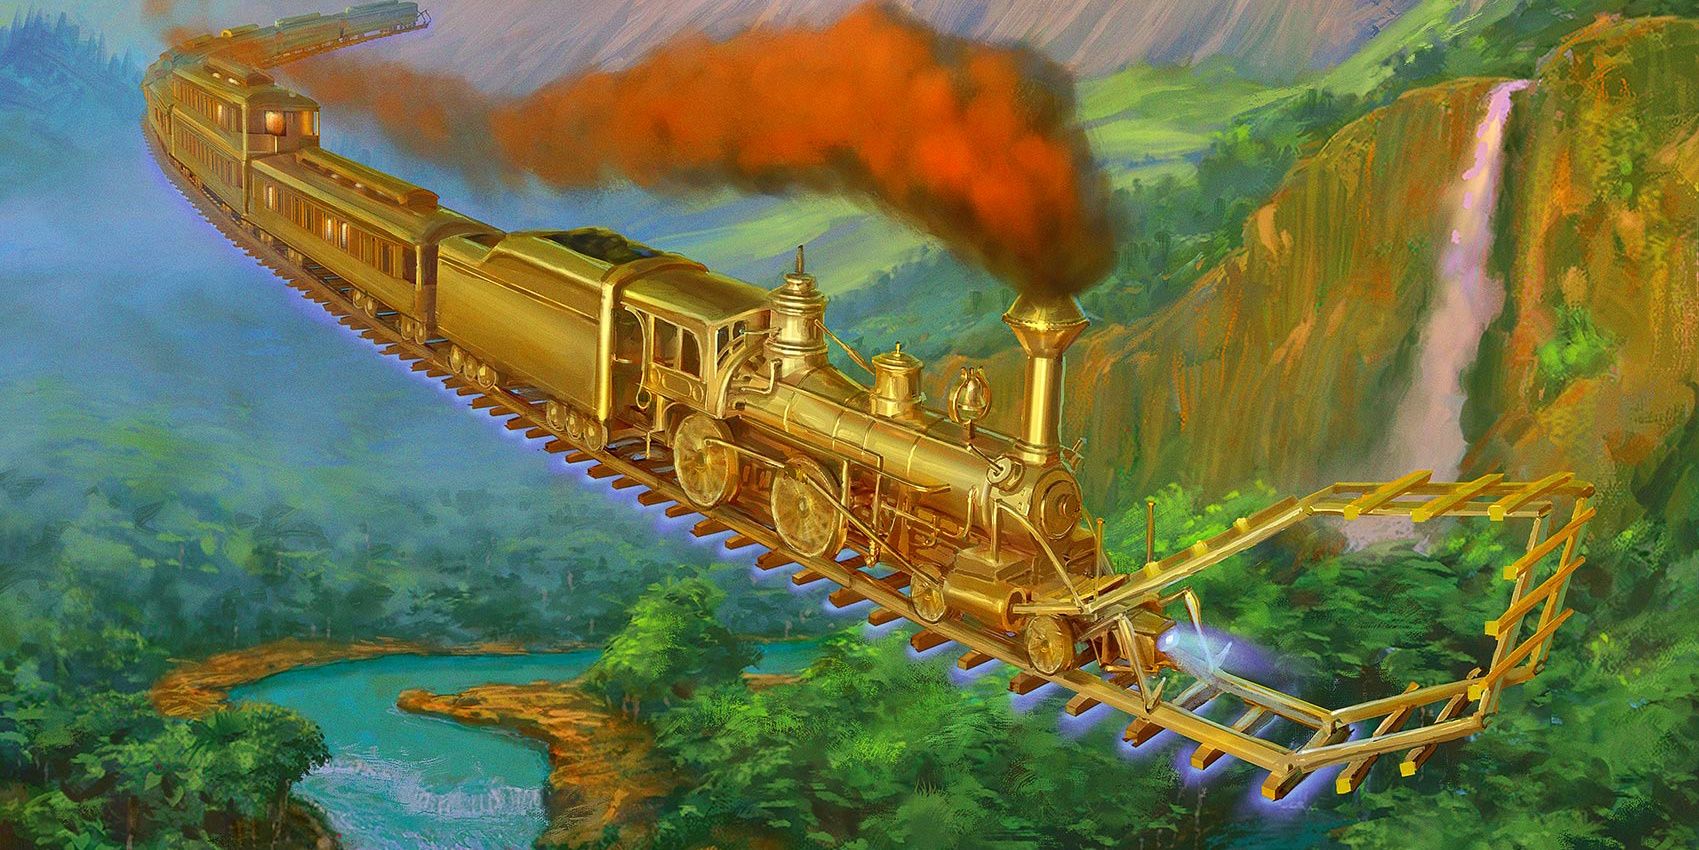 Magical train the Concordant Express flying over a lush tropical landscapeMagical train the Concordant Express flying over a lush tropical landscape.